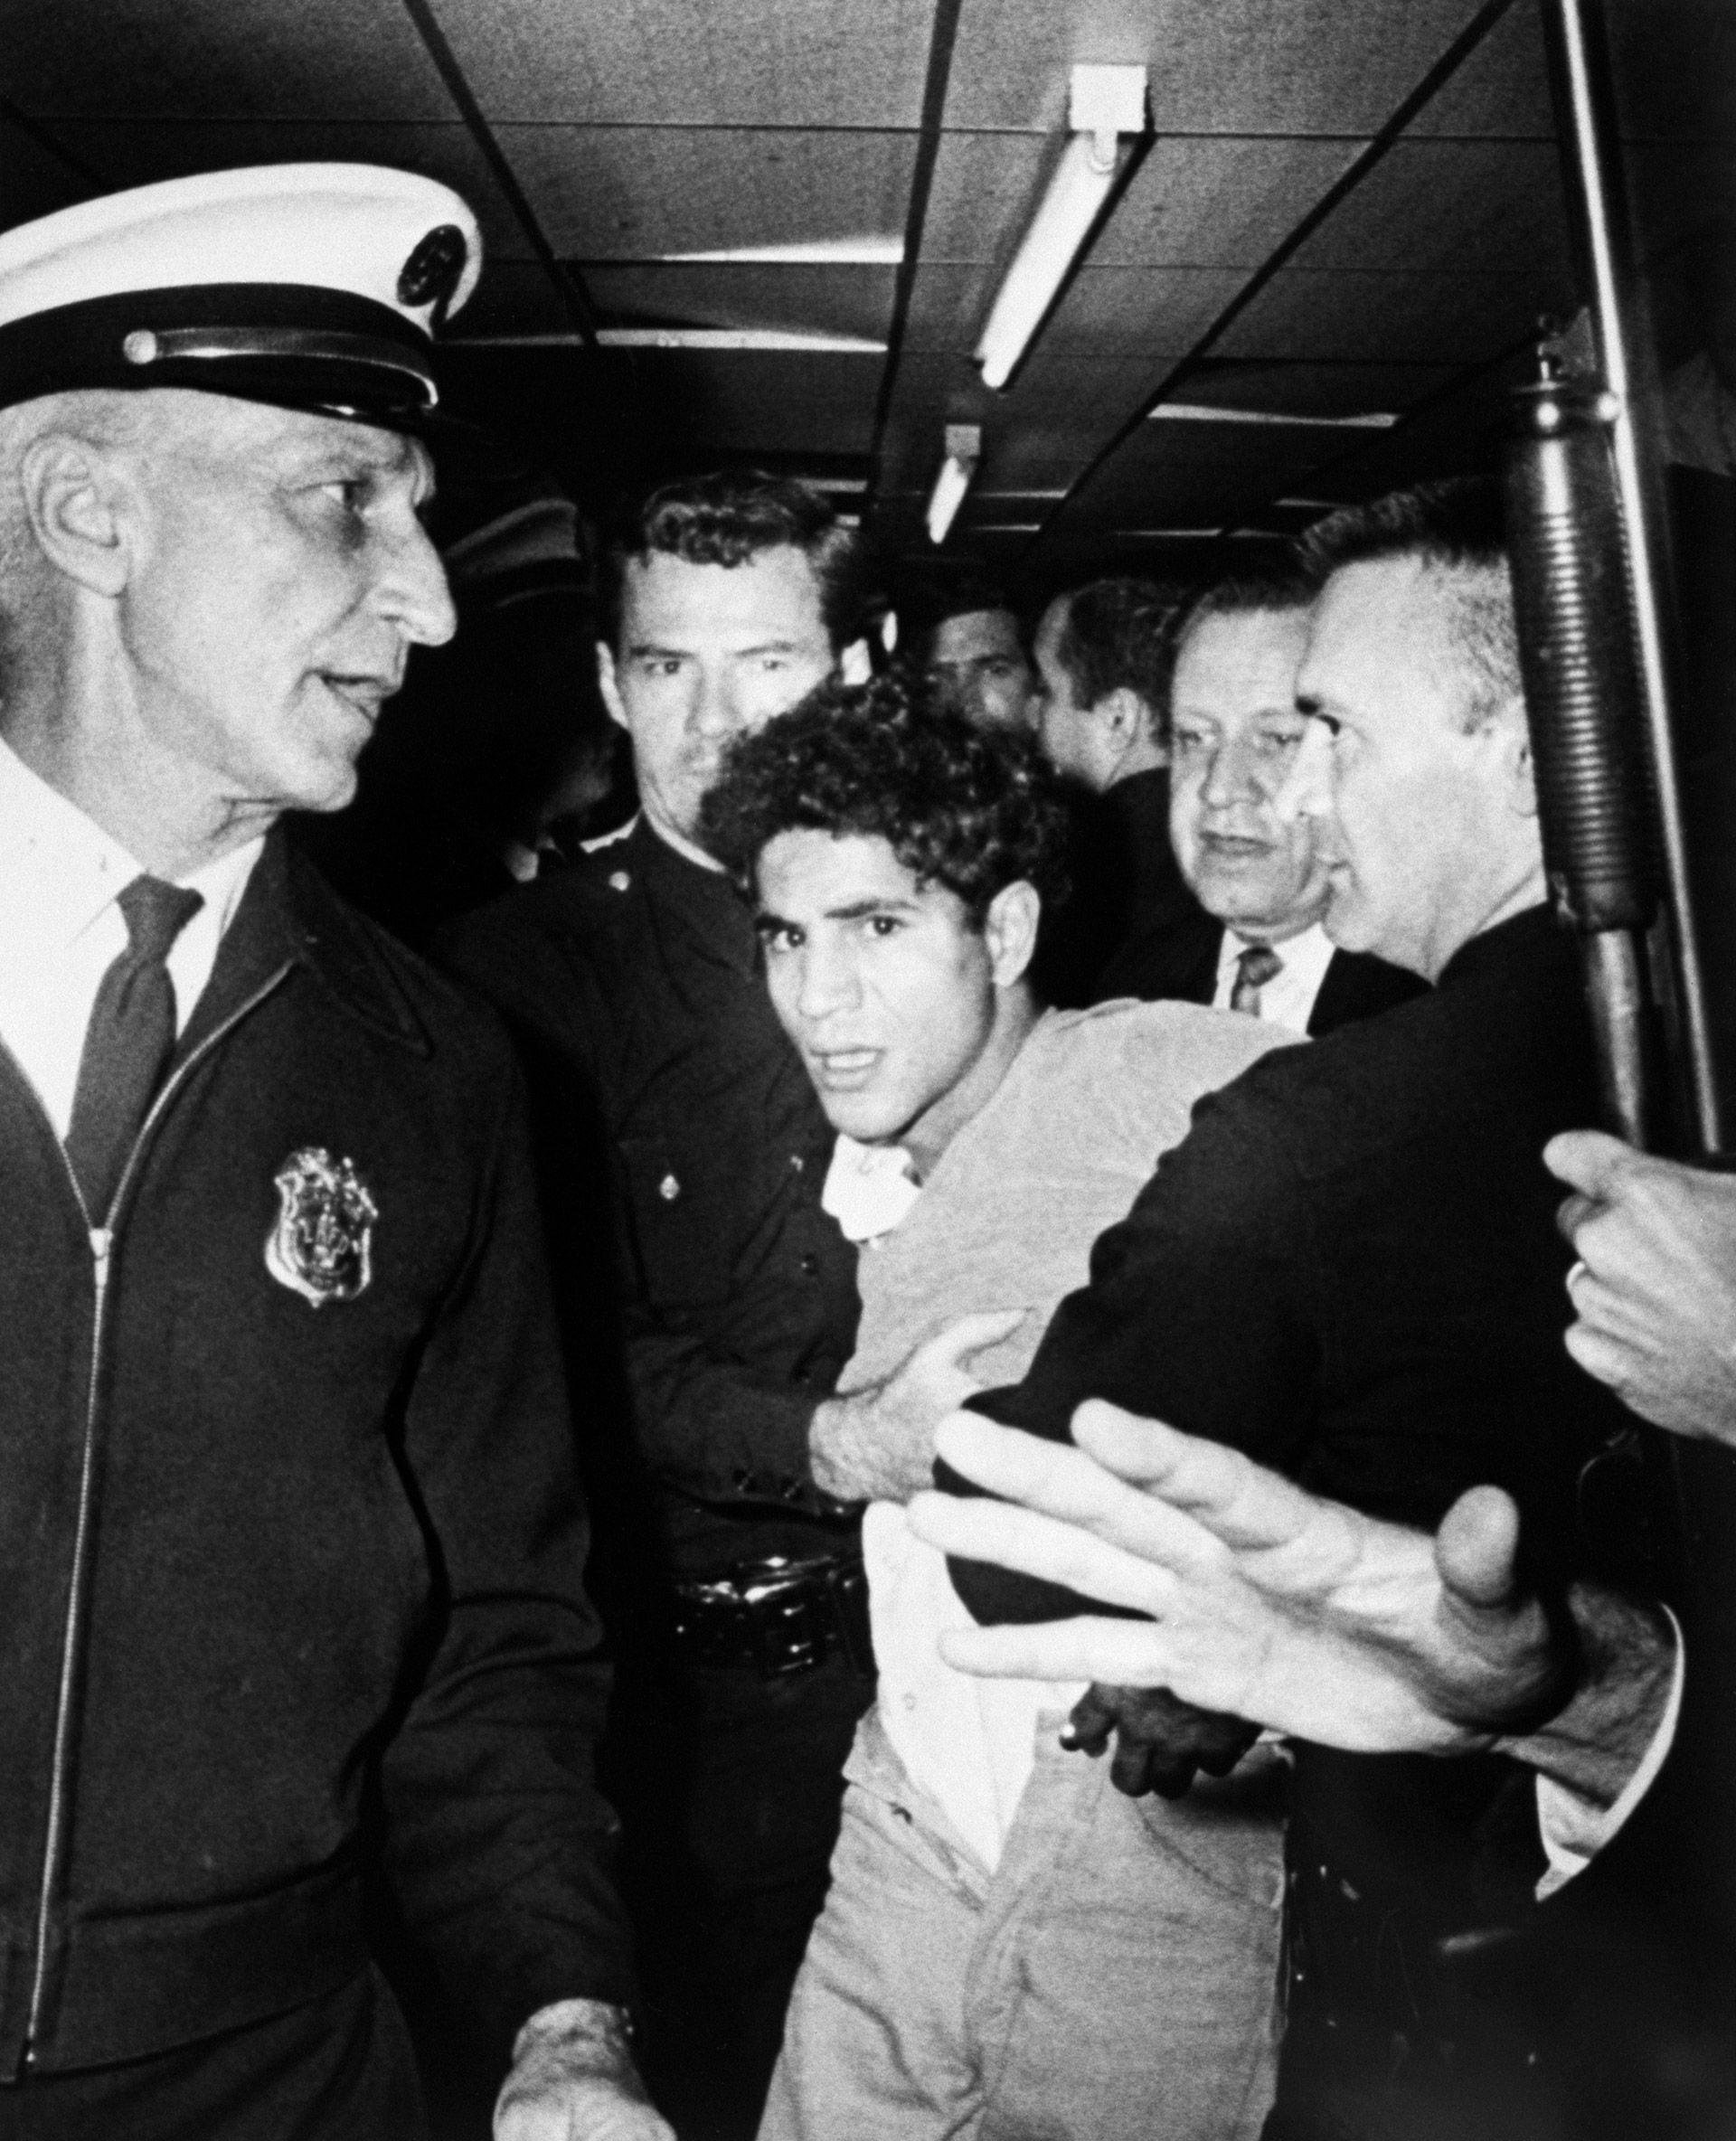 Sirhan Sirhan is led away from the Ambassador Hotel after shooting Robert F. Kennedy